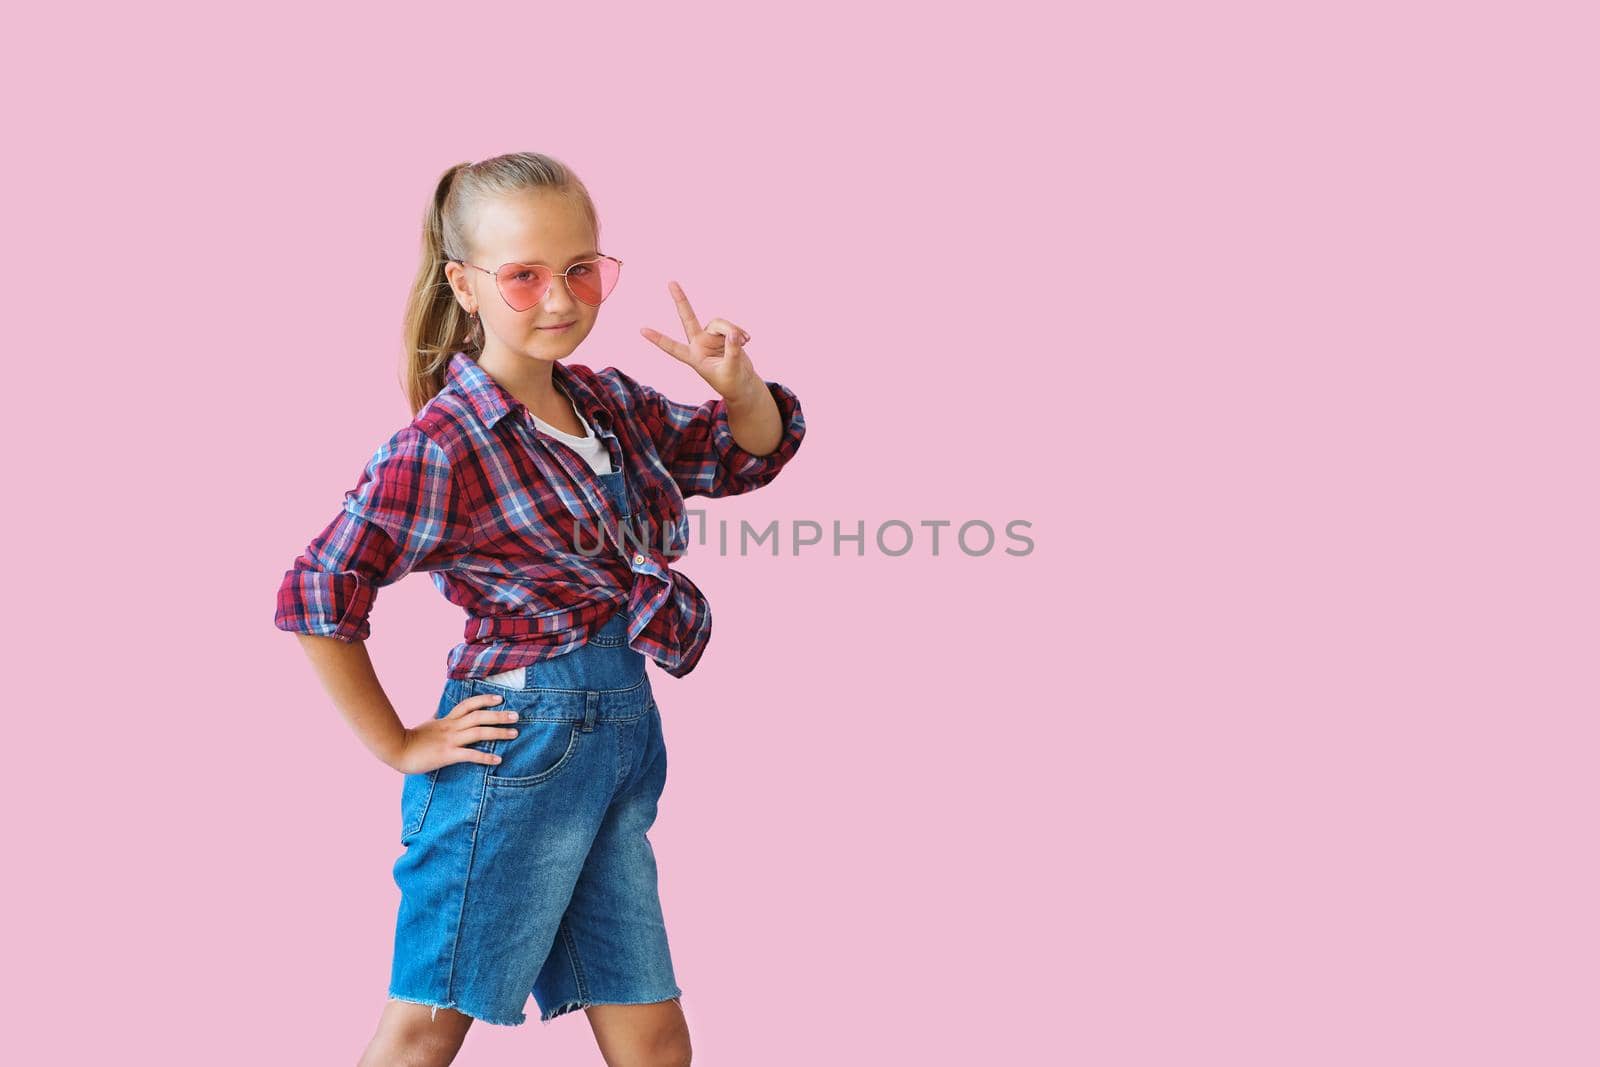 Pretty cool kid girl in pink sunglasses posing against pink background. Fashion style portrait of young happy smiling woman, copy space.